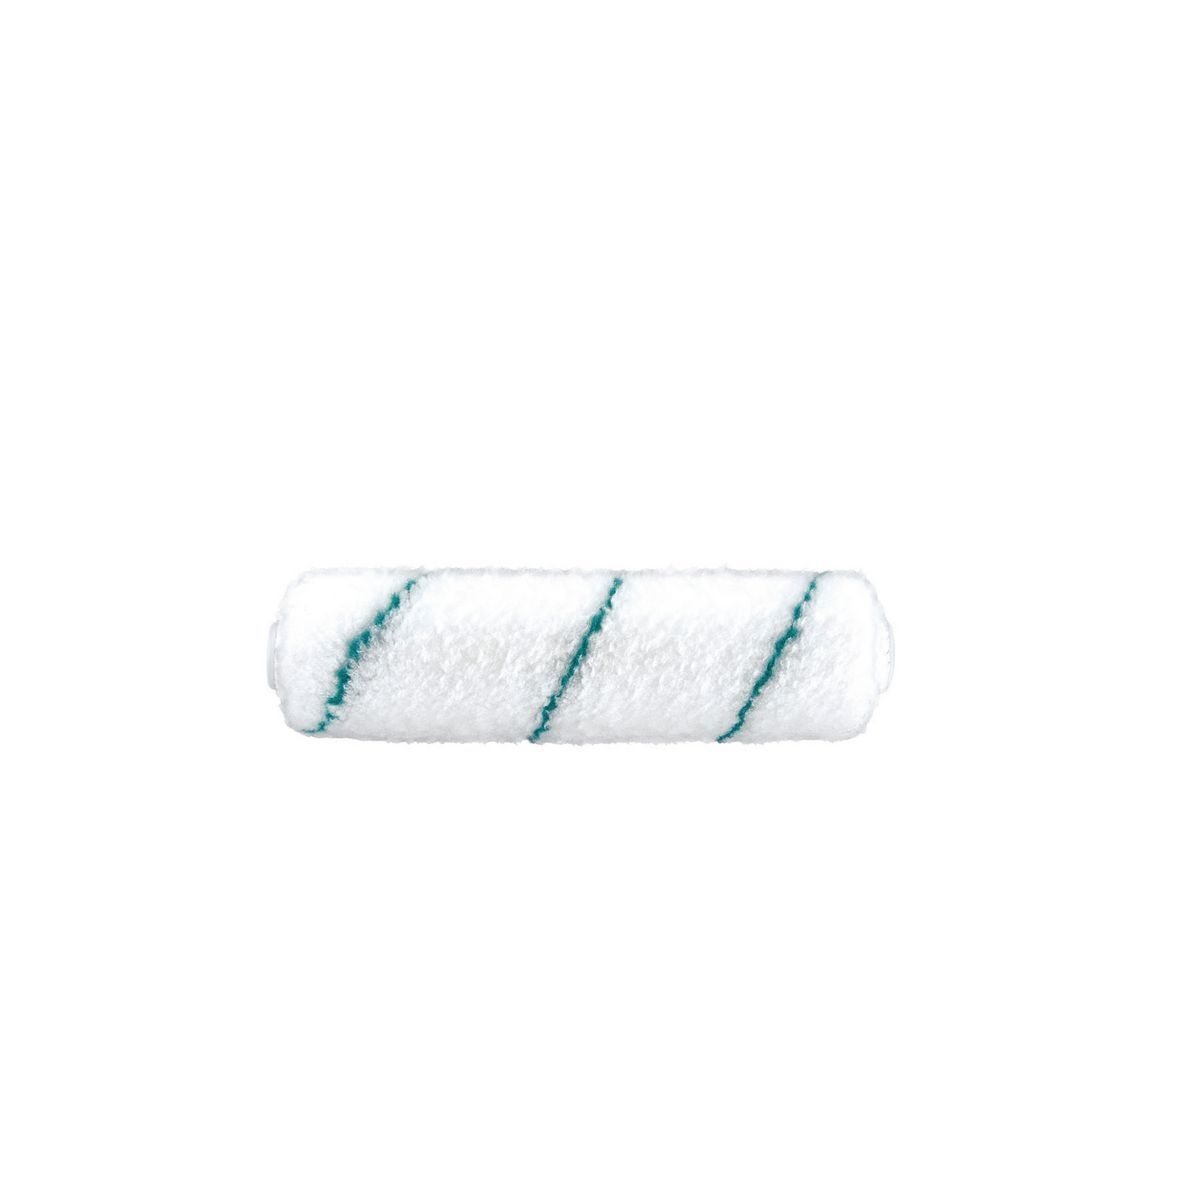 PURDY 6 in. Paint Roller Cover with 1/2 in. Nap - BETTER Quality, 2 Pack